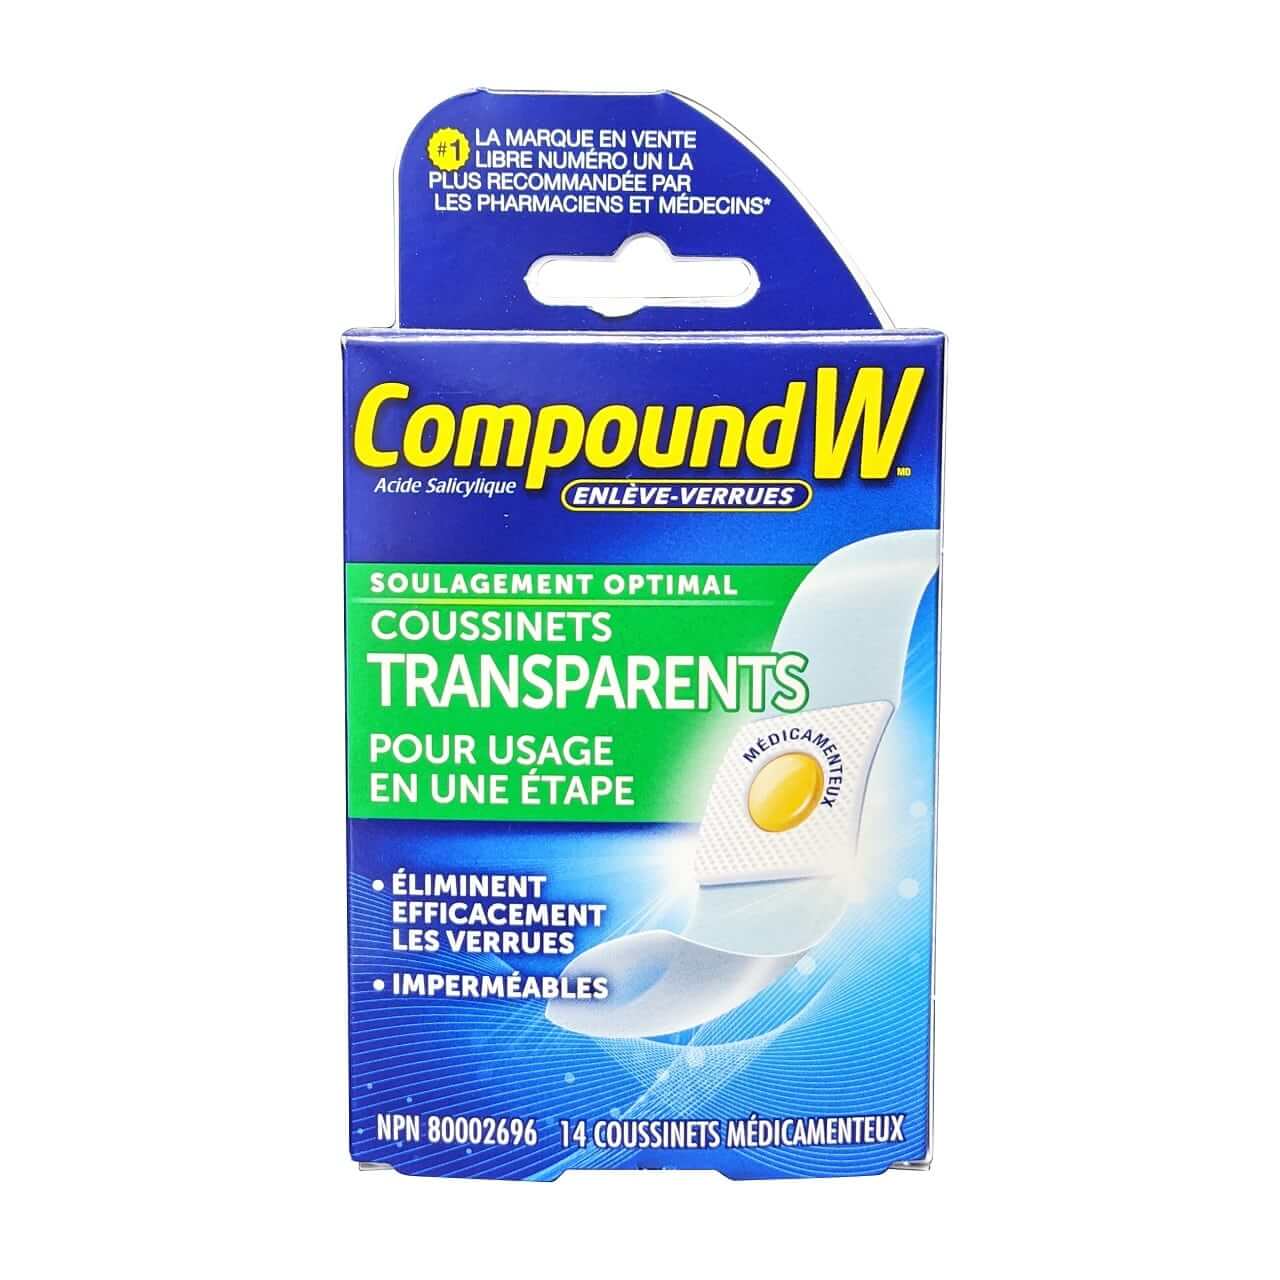 Product label for Compound W Maximum Strength One Step Wart Remover Invisible Pads (14 pads) in French